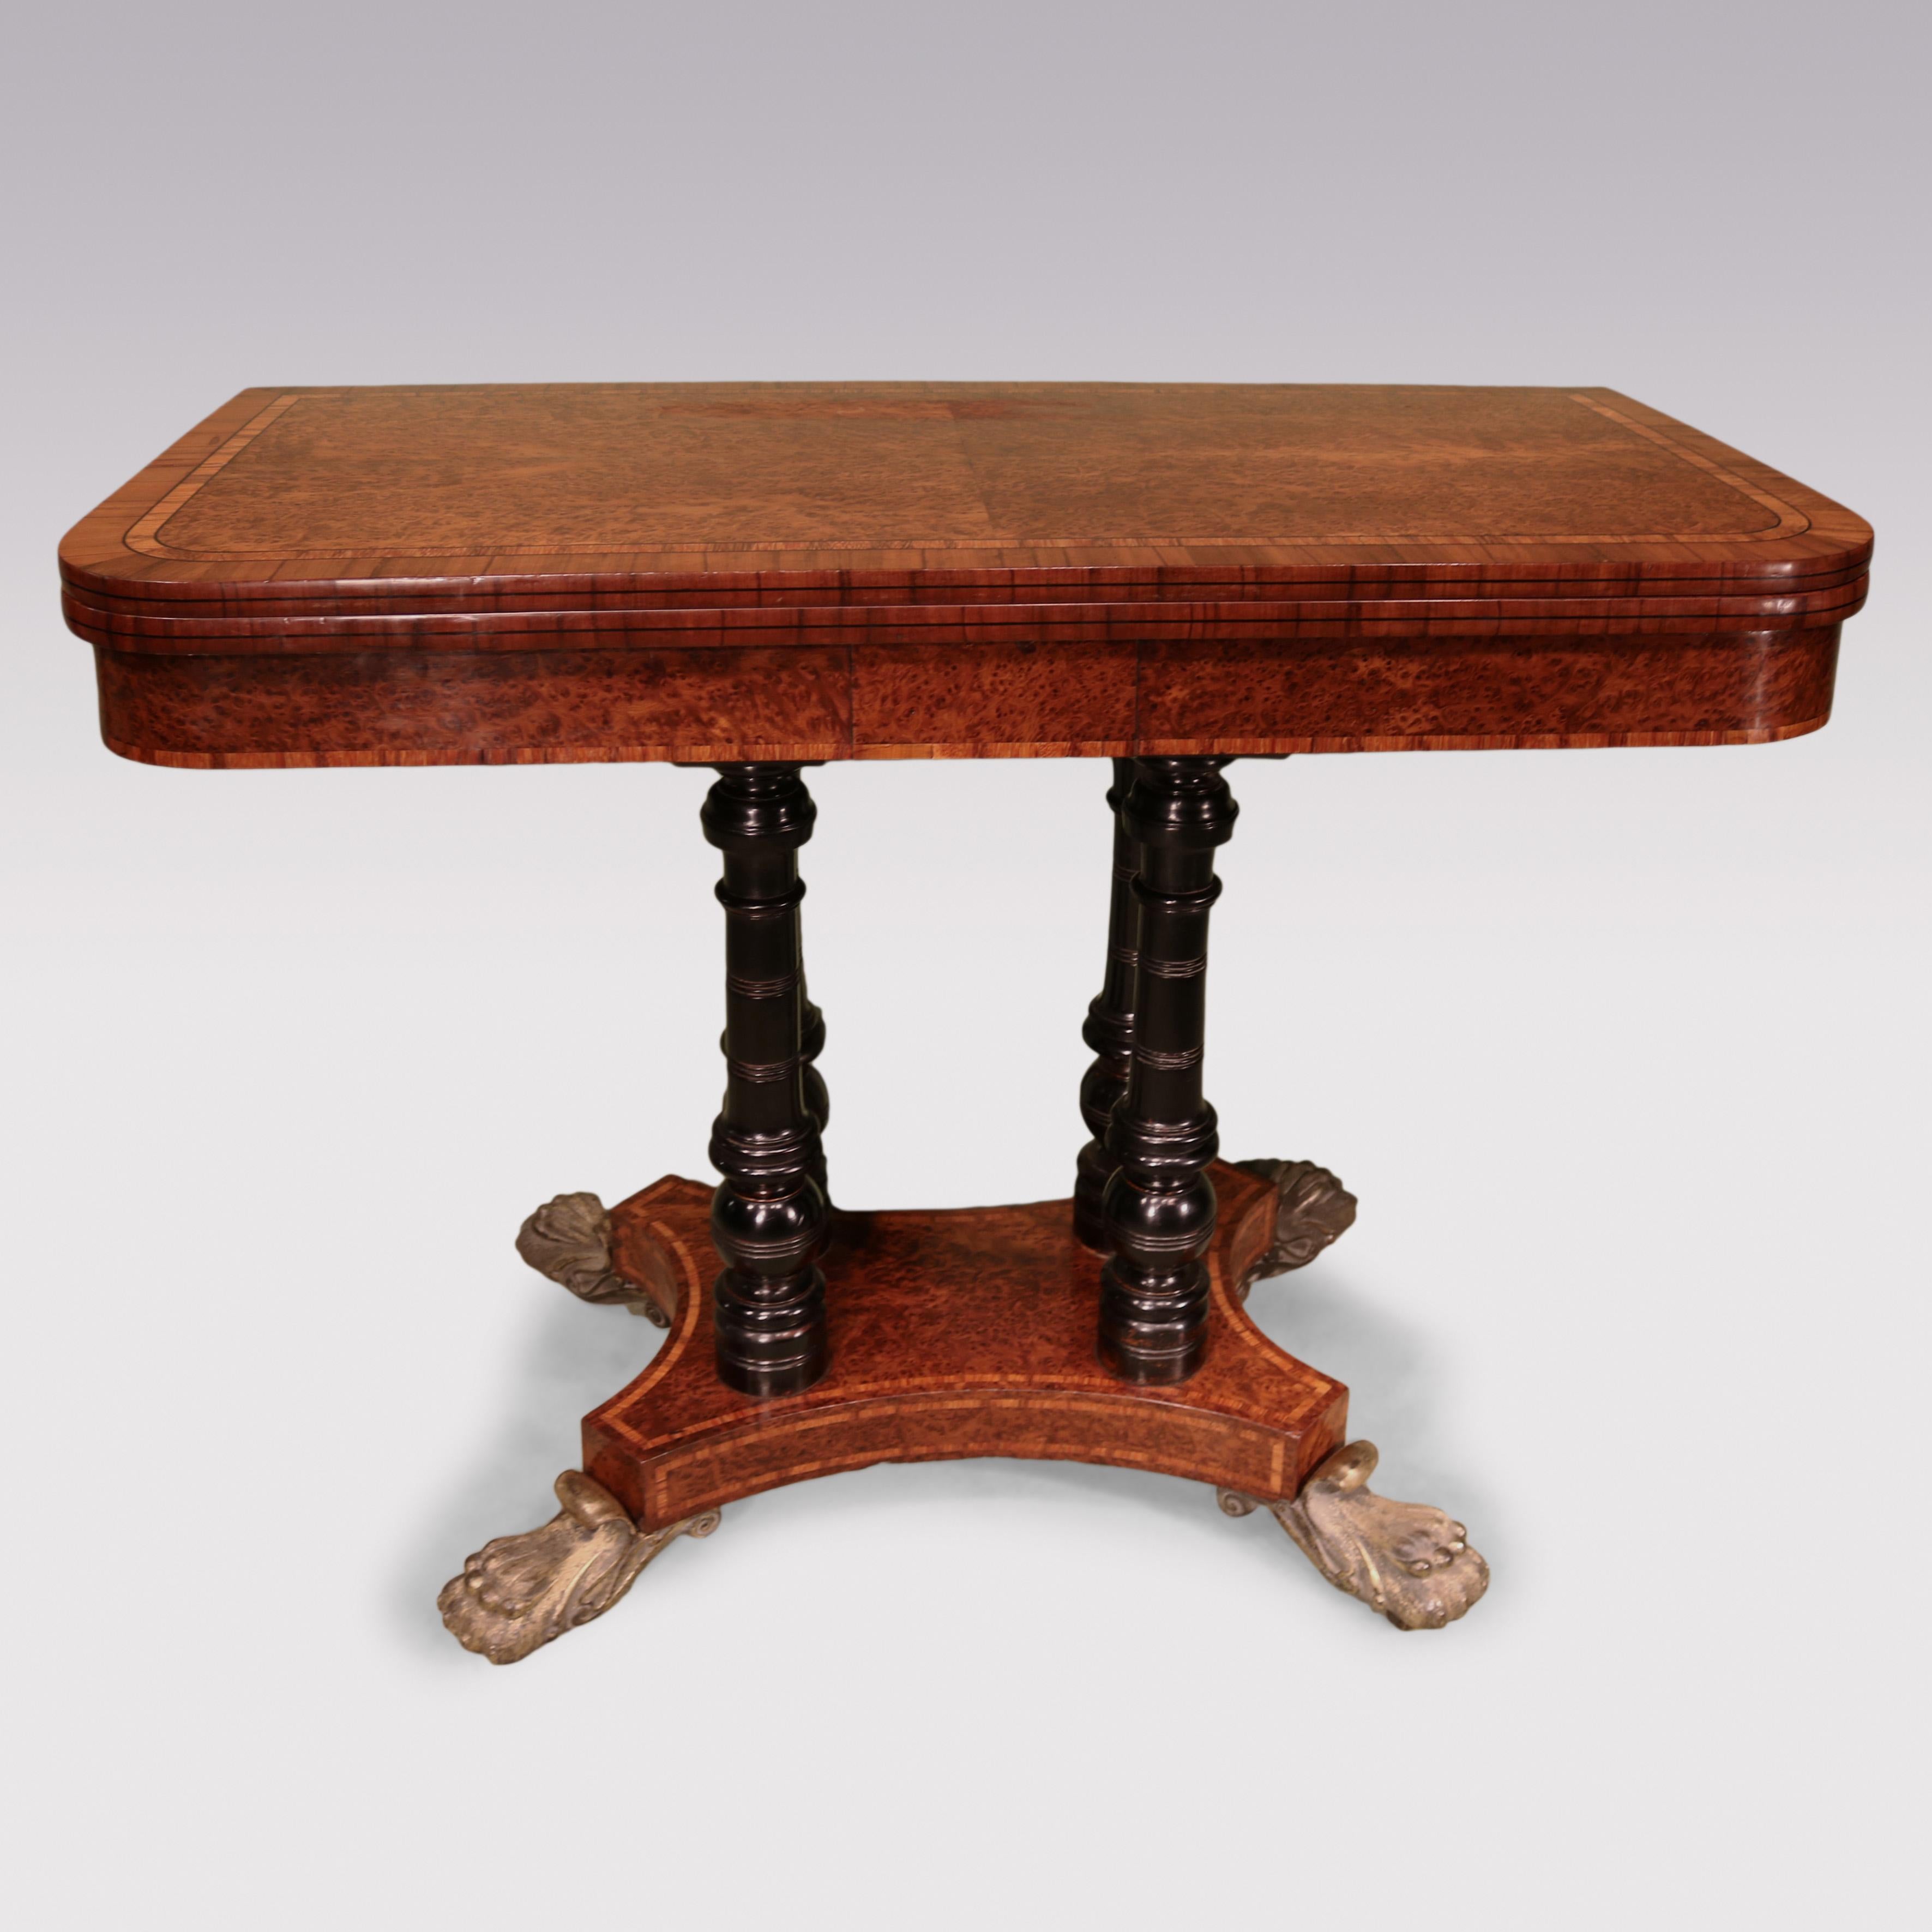 A late Regency period burr yew wood card table with quarter veneered rounded rectangular fold over top with baise lining.  The table raised on turned ebonised baluster supports with  concave base and canted corners, ending on bold brass scrolled